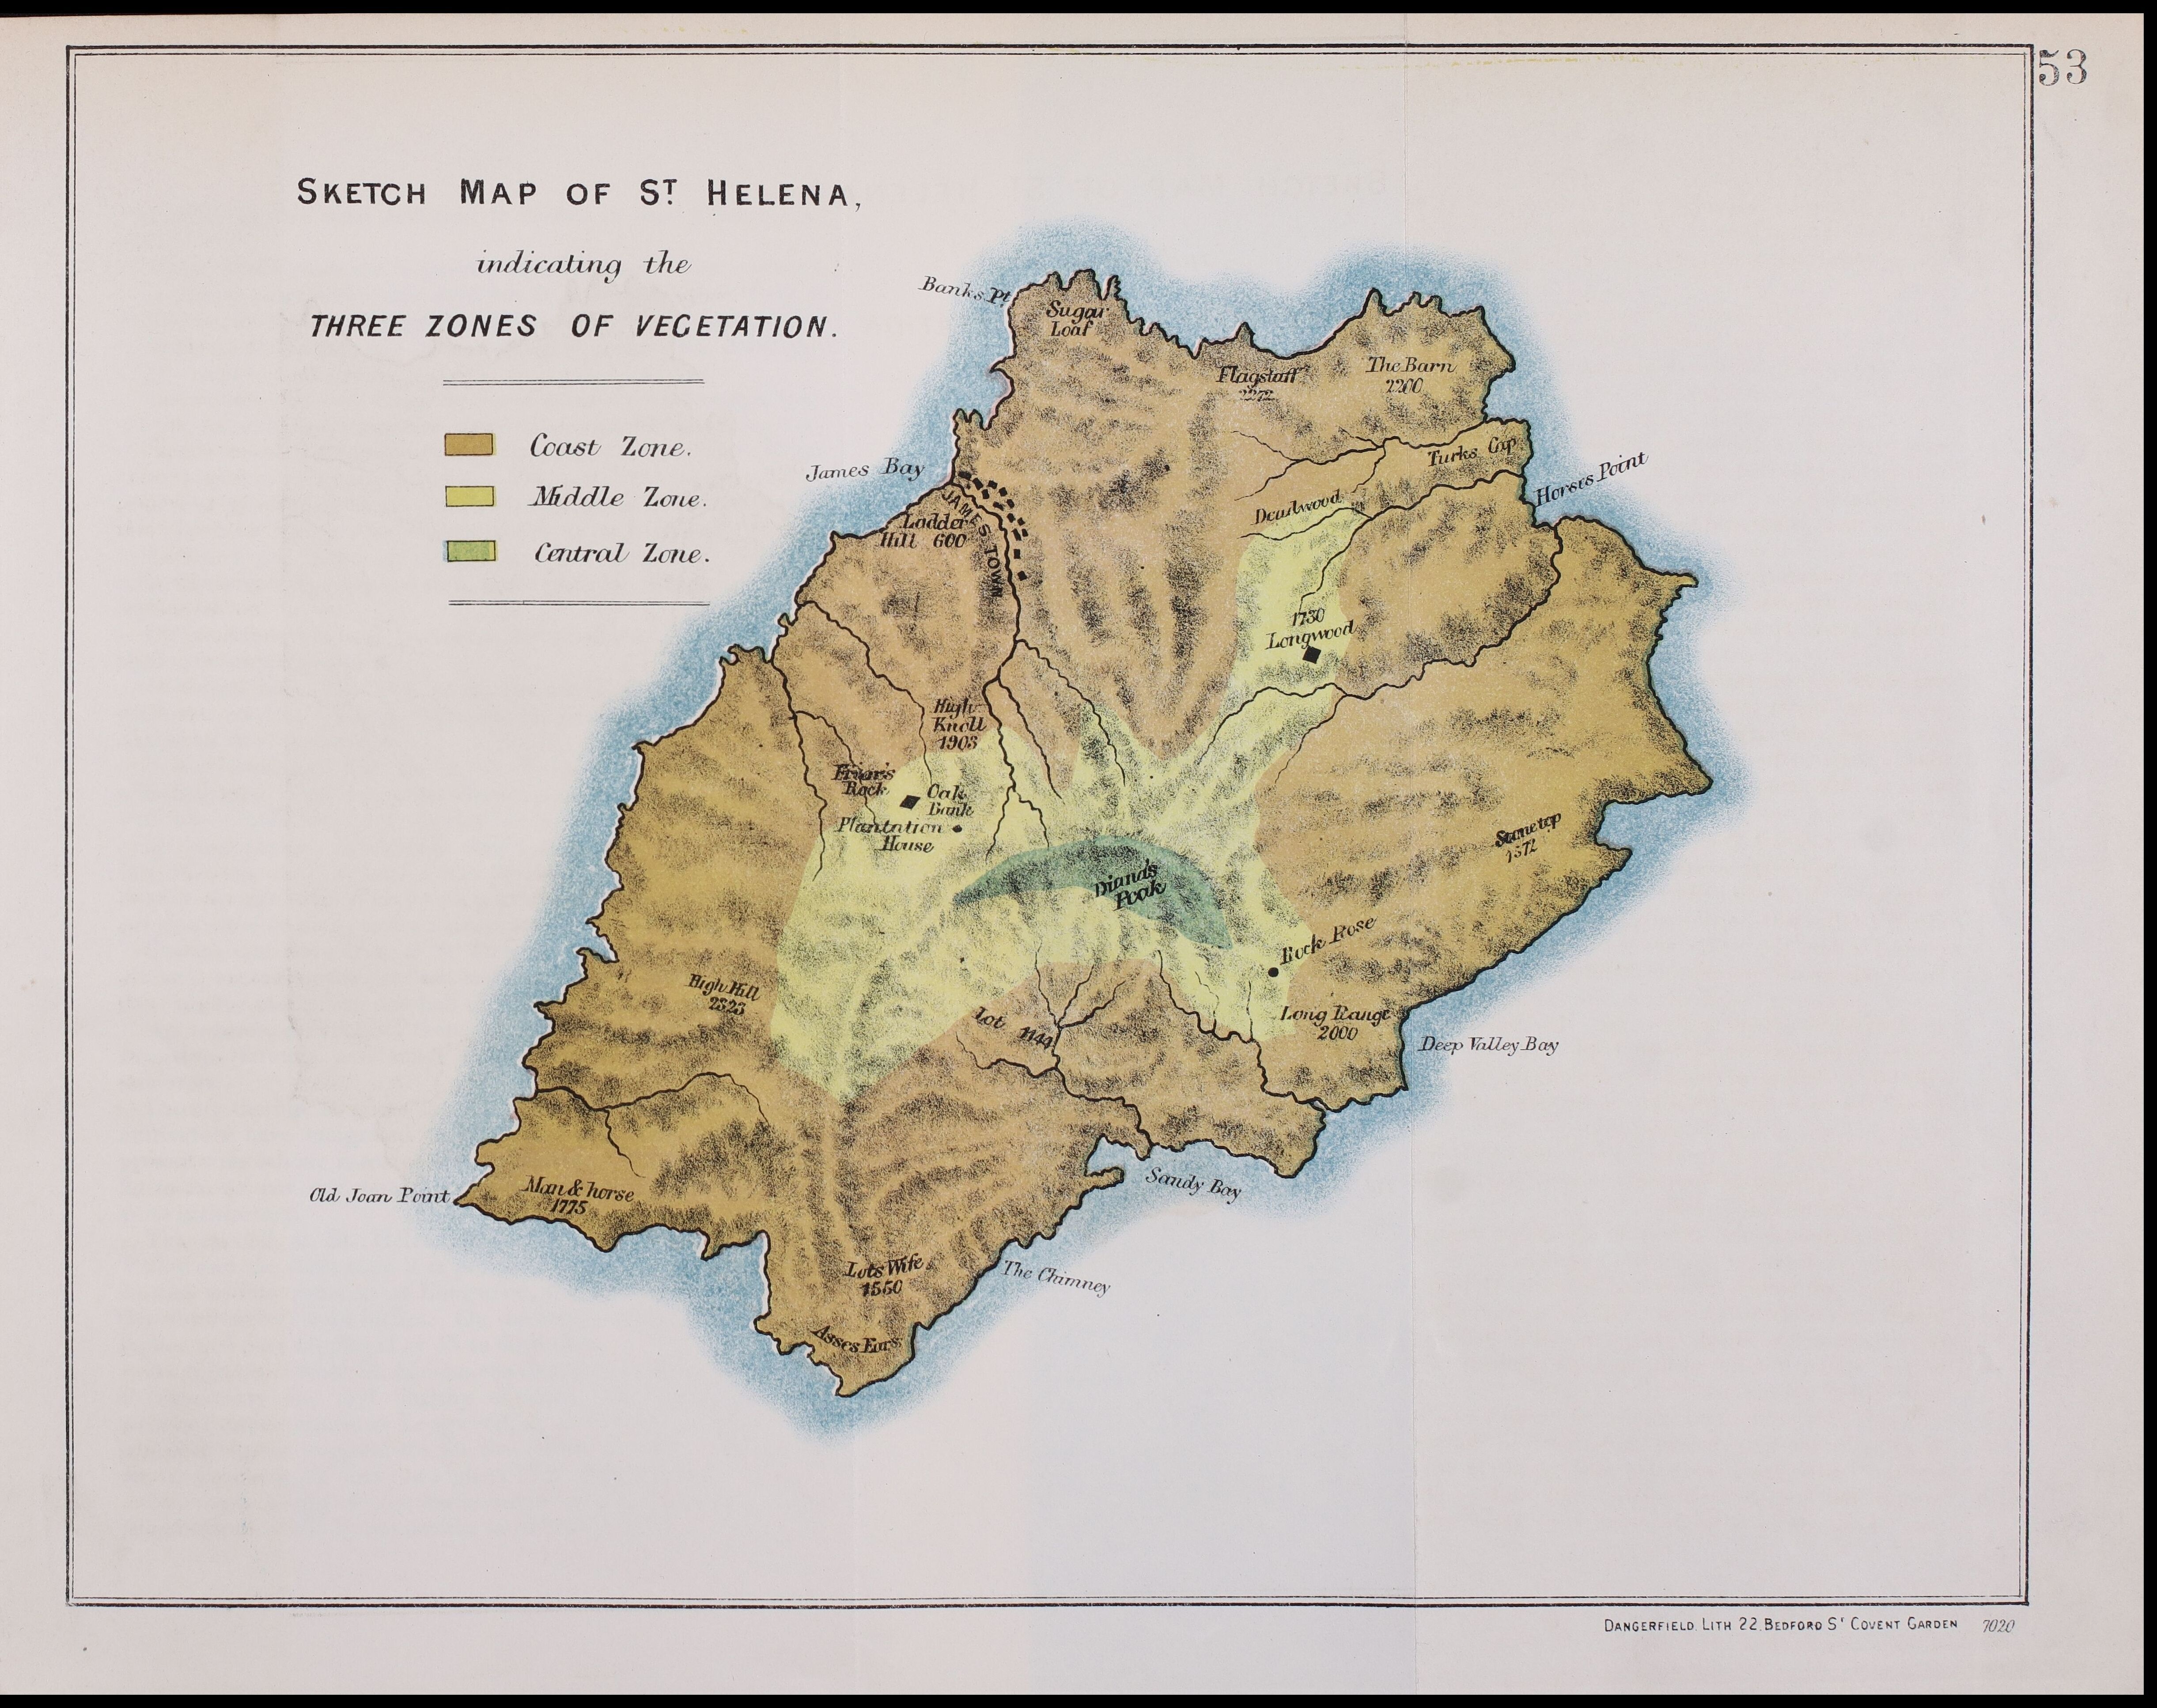 A map of St Helena